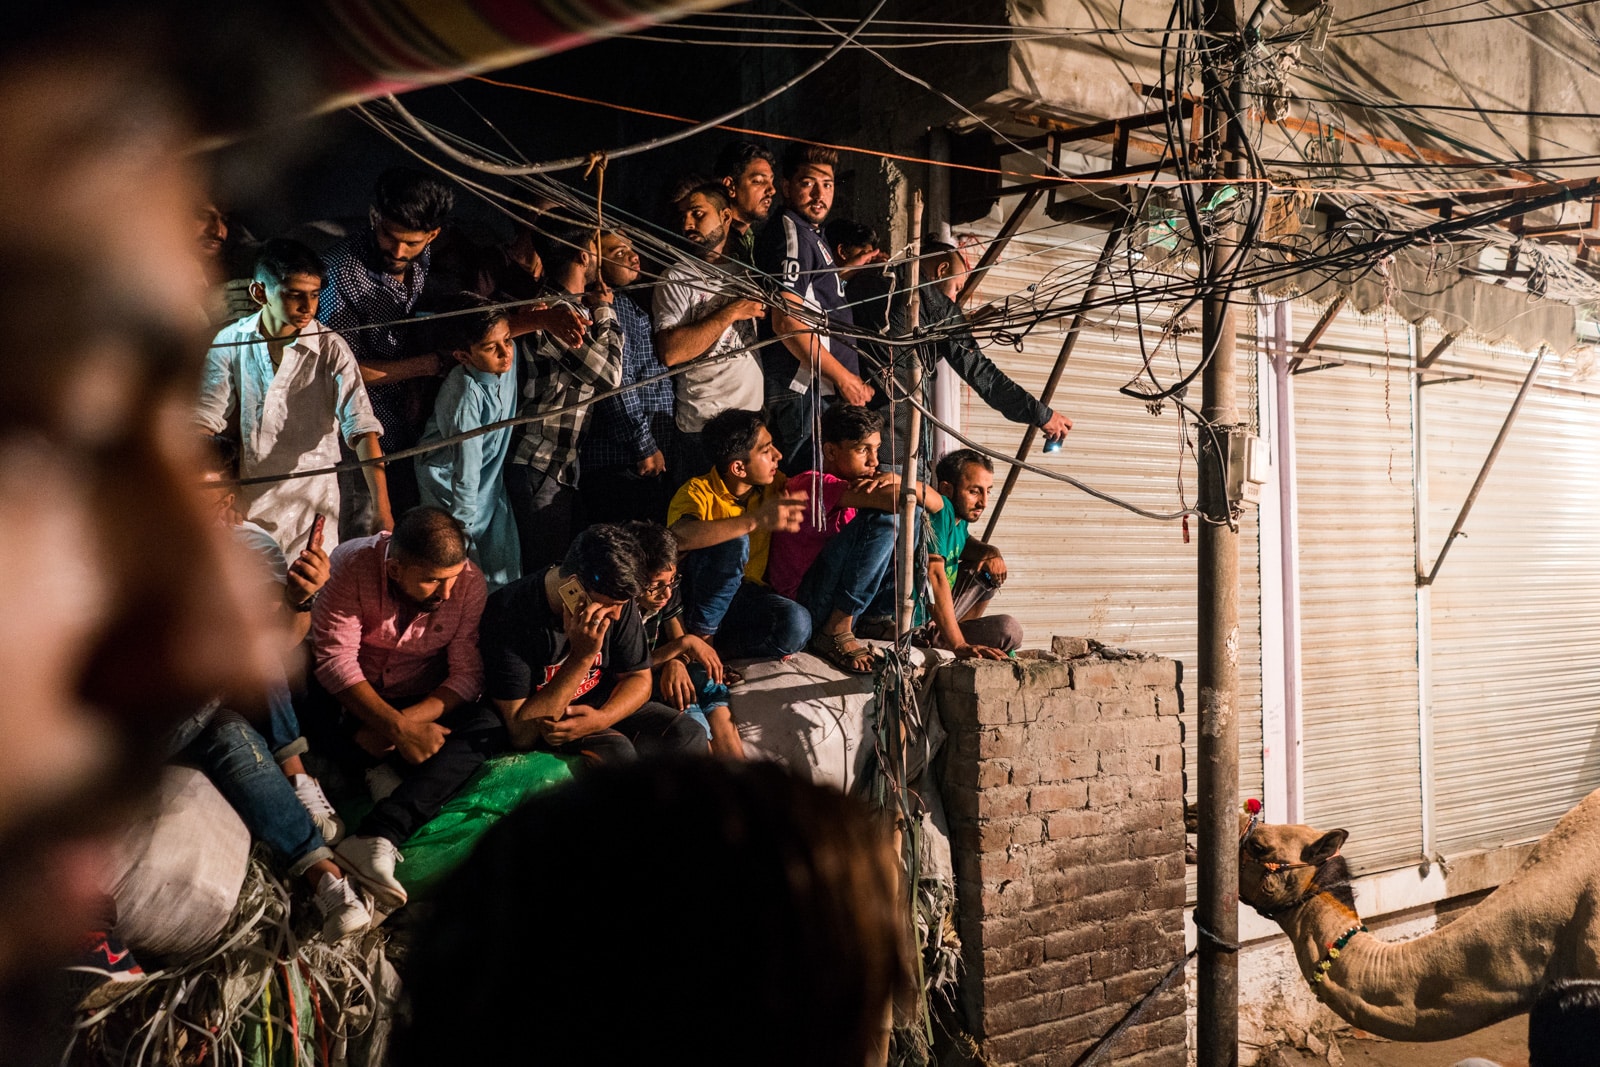 Celebrating Eid al-Adha in Lahore, Pakistan - Crowd of men watching a camel sacrifice - Lost With Purpose travel blog